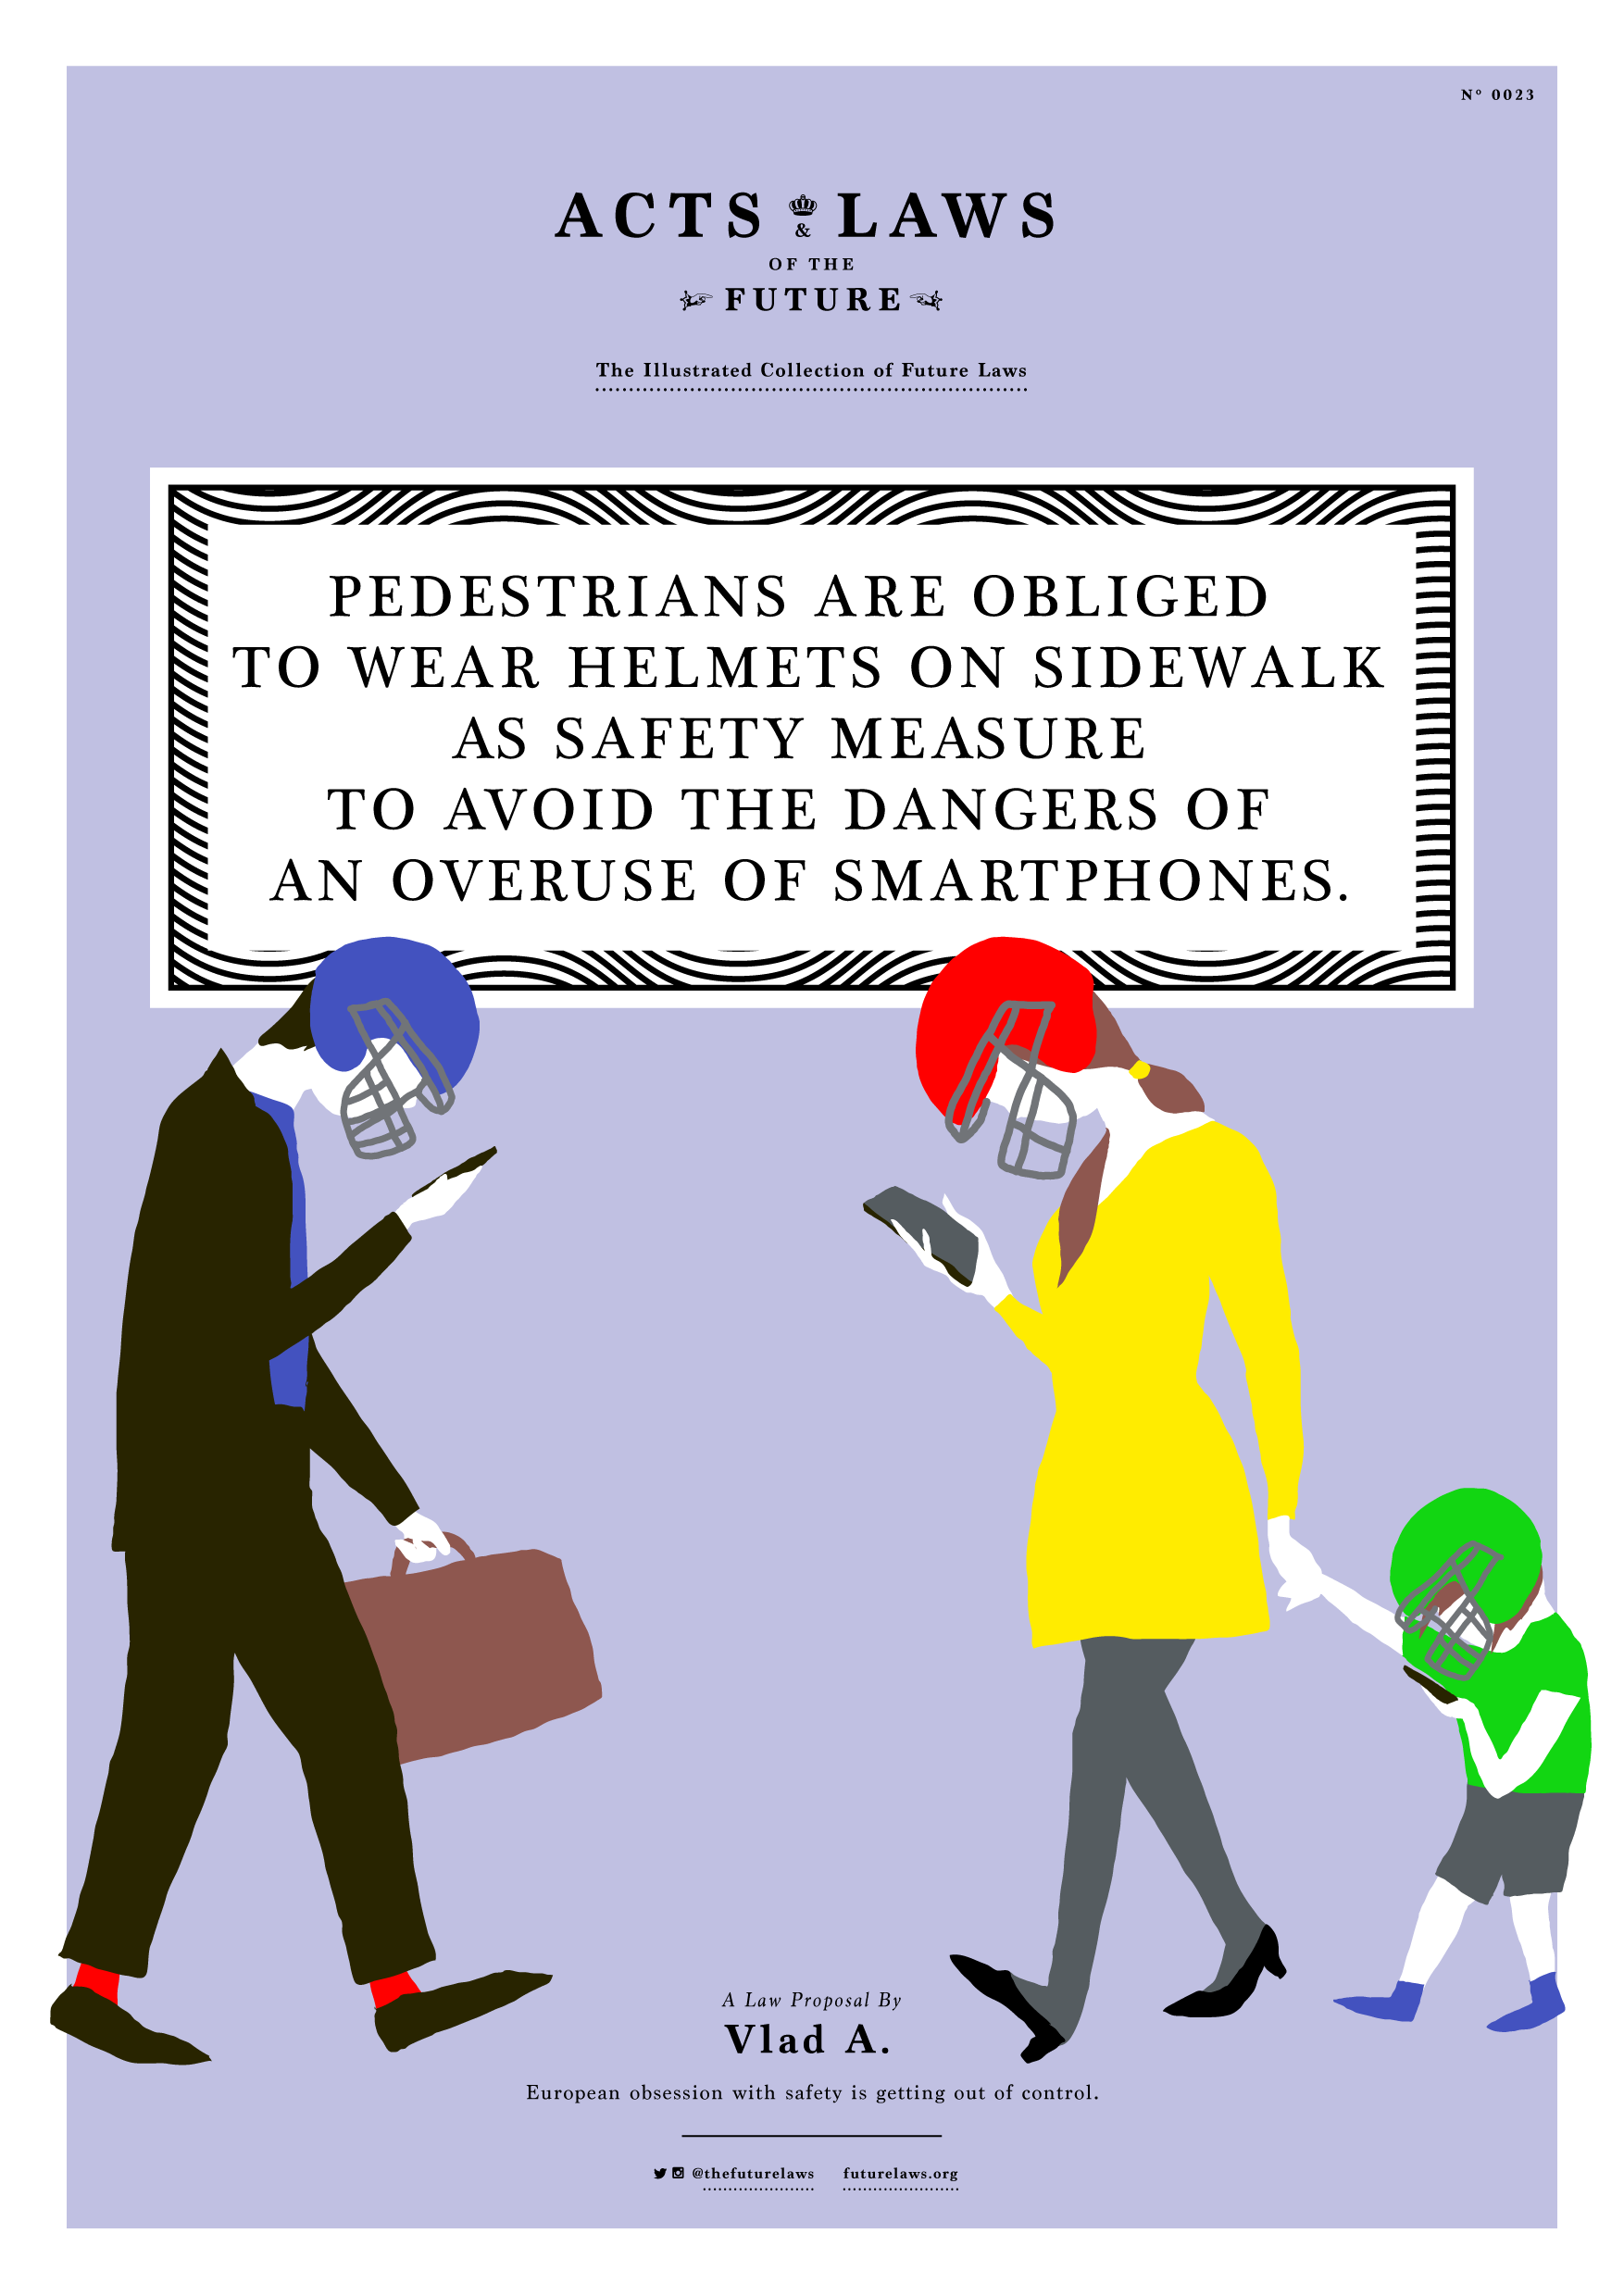 Pedestrians are obliged to wear helmets on the sidewalk as safety measures to avoid the dangers of an overuse of smartphones.